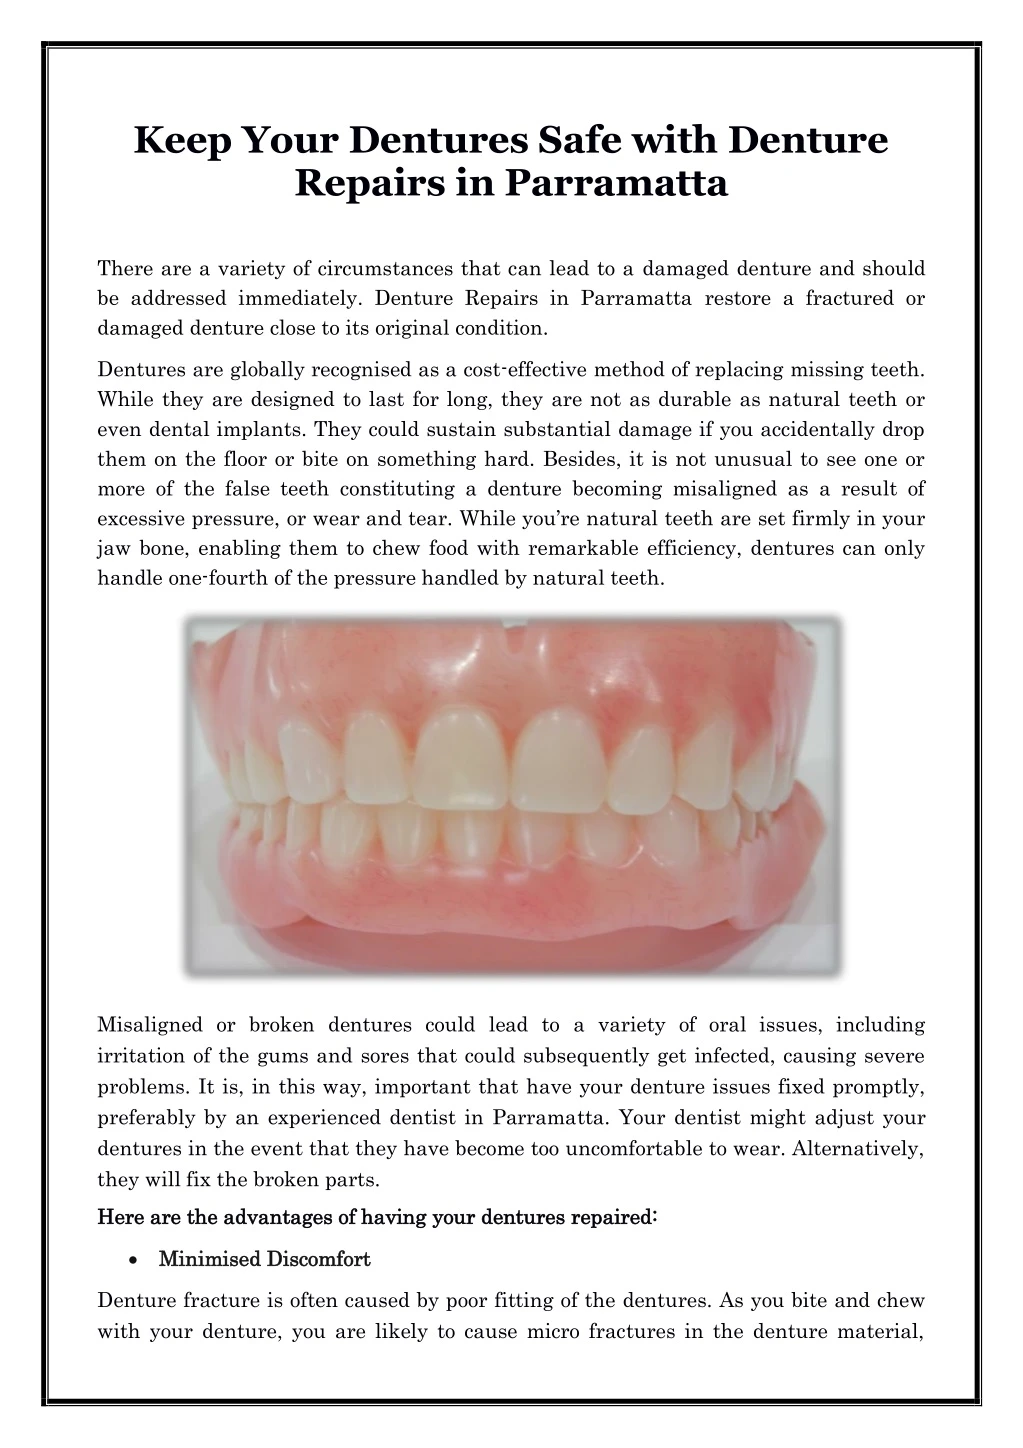 keep your dentures safe with denture repairs